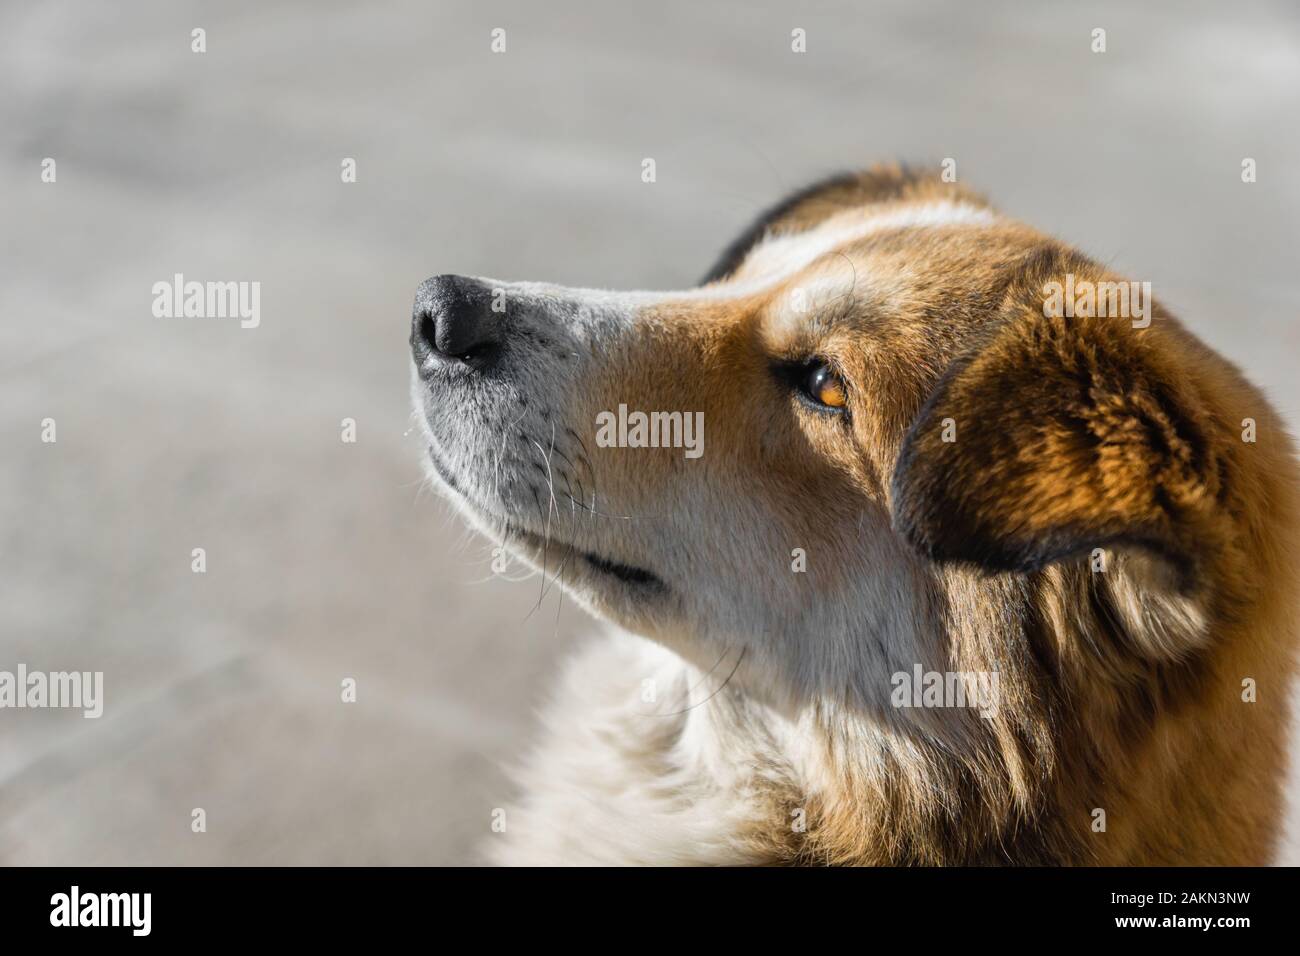 young puppy dog looking up with an open eye looking afar - dog face side profile with hopeful and wishful look Stock Photo